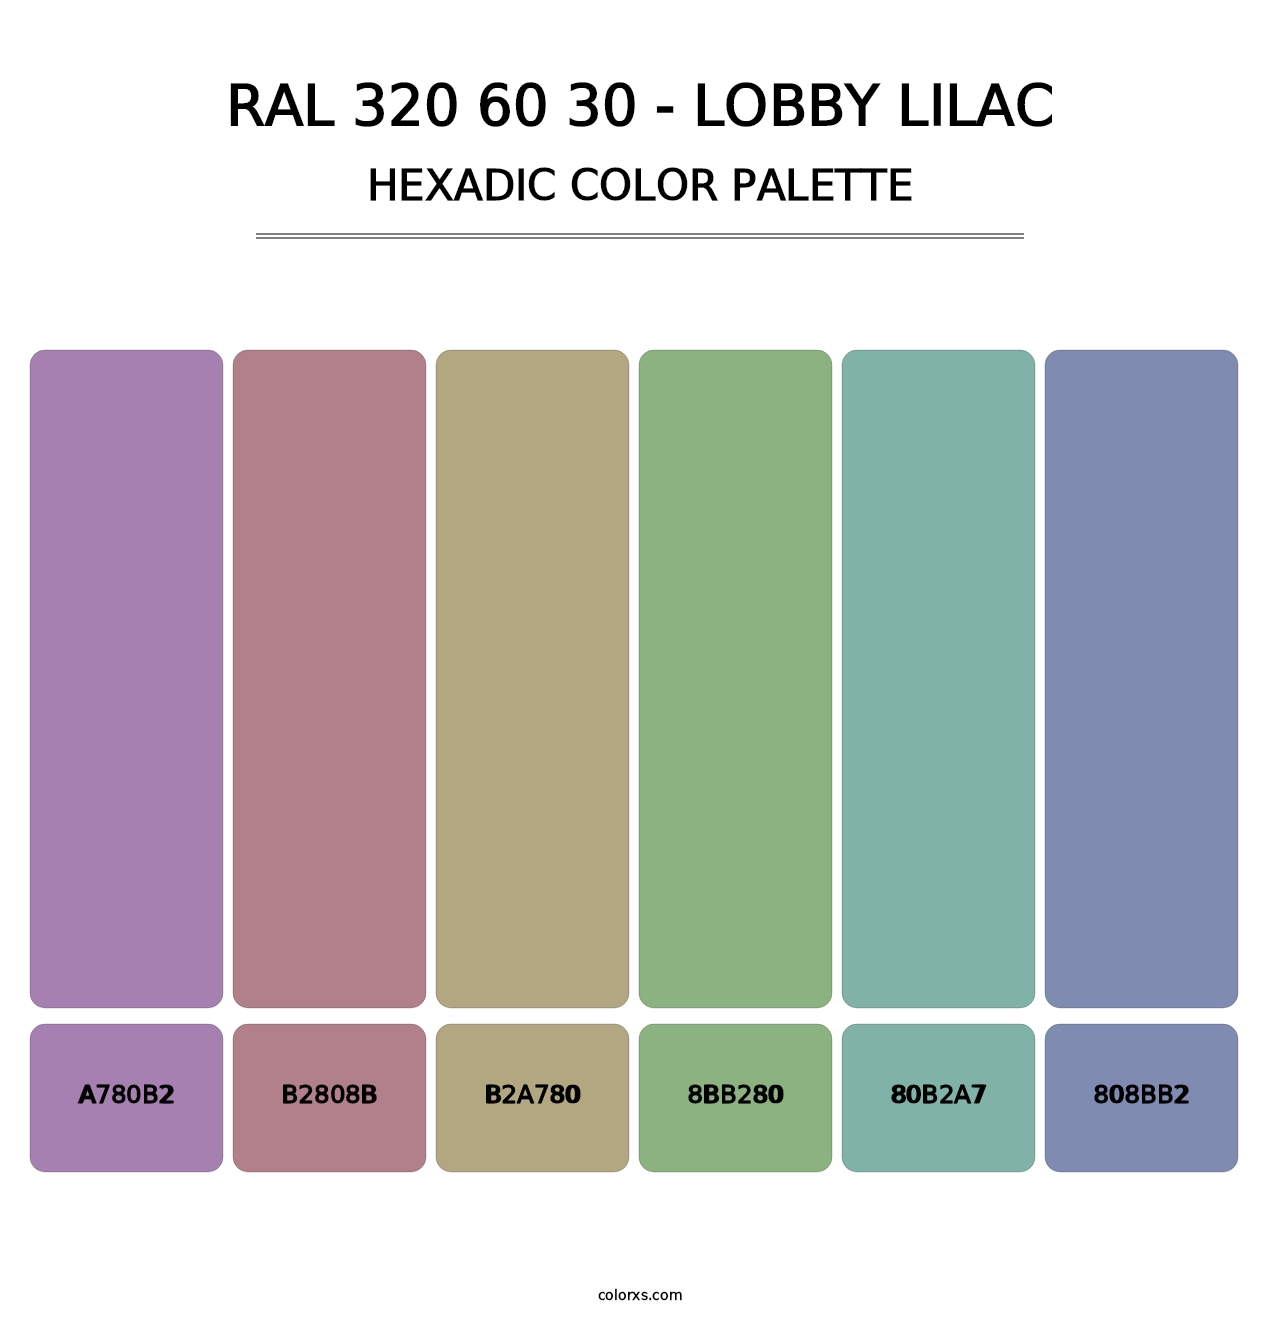 RAL 320 60 30 - Lobby Lilac - Hexadic Color Palette